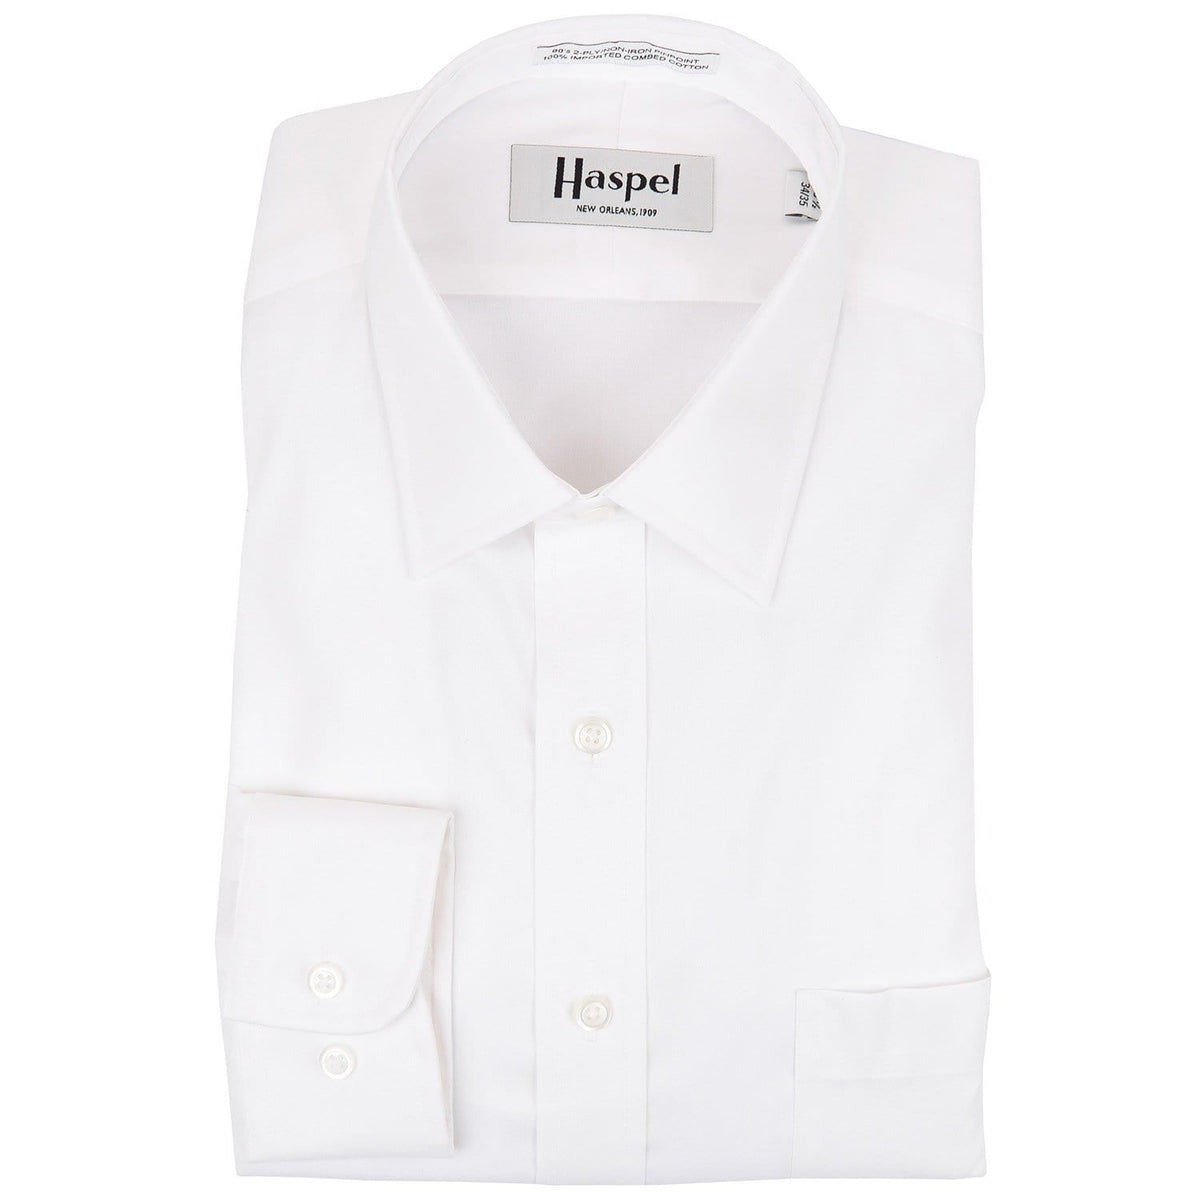 Dauphine Solid White Broadcloth Dress Shirt - Haspel ClothingNo hassle, only Haspel means no wasting time on multiple websites to complete your look. You can find all the classic men&#39;s dress shirts here that were carefully chosen to pair up with our unique, lightweight men&#39;s suits.